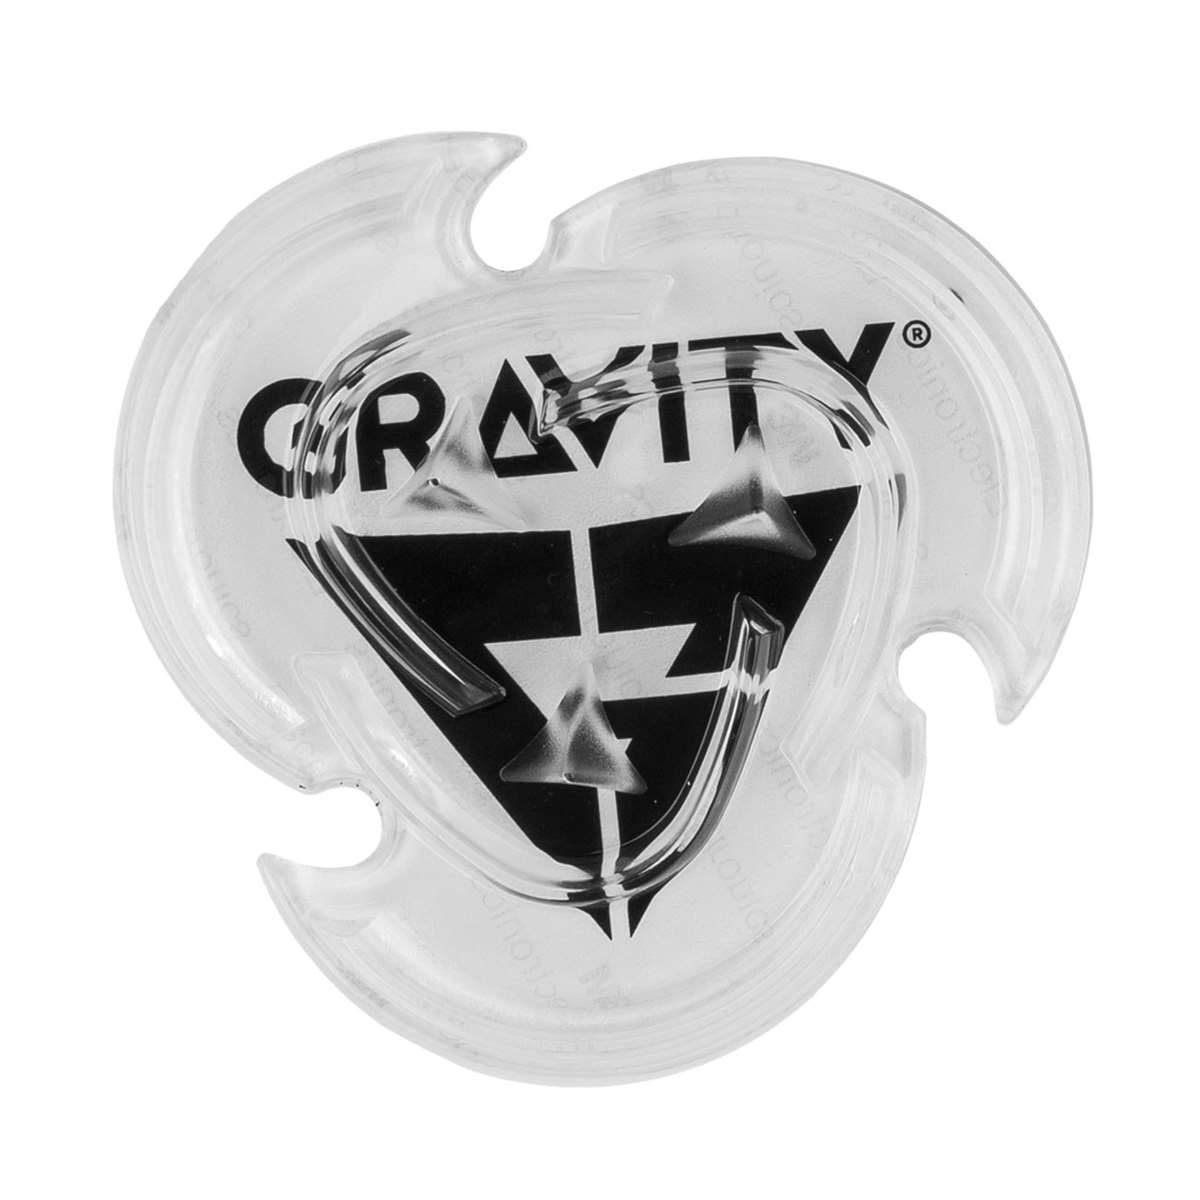 snowboard grip Gravity Icon mat clear